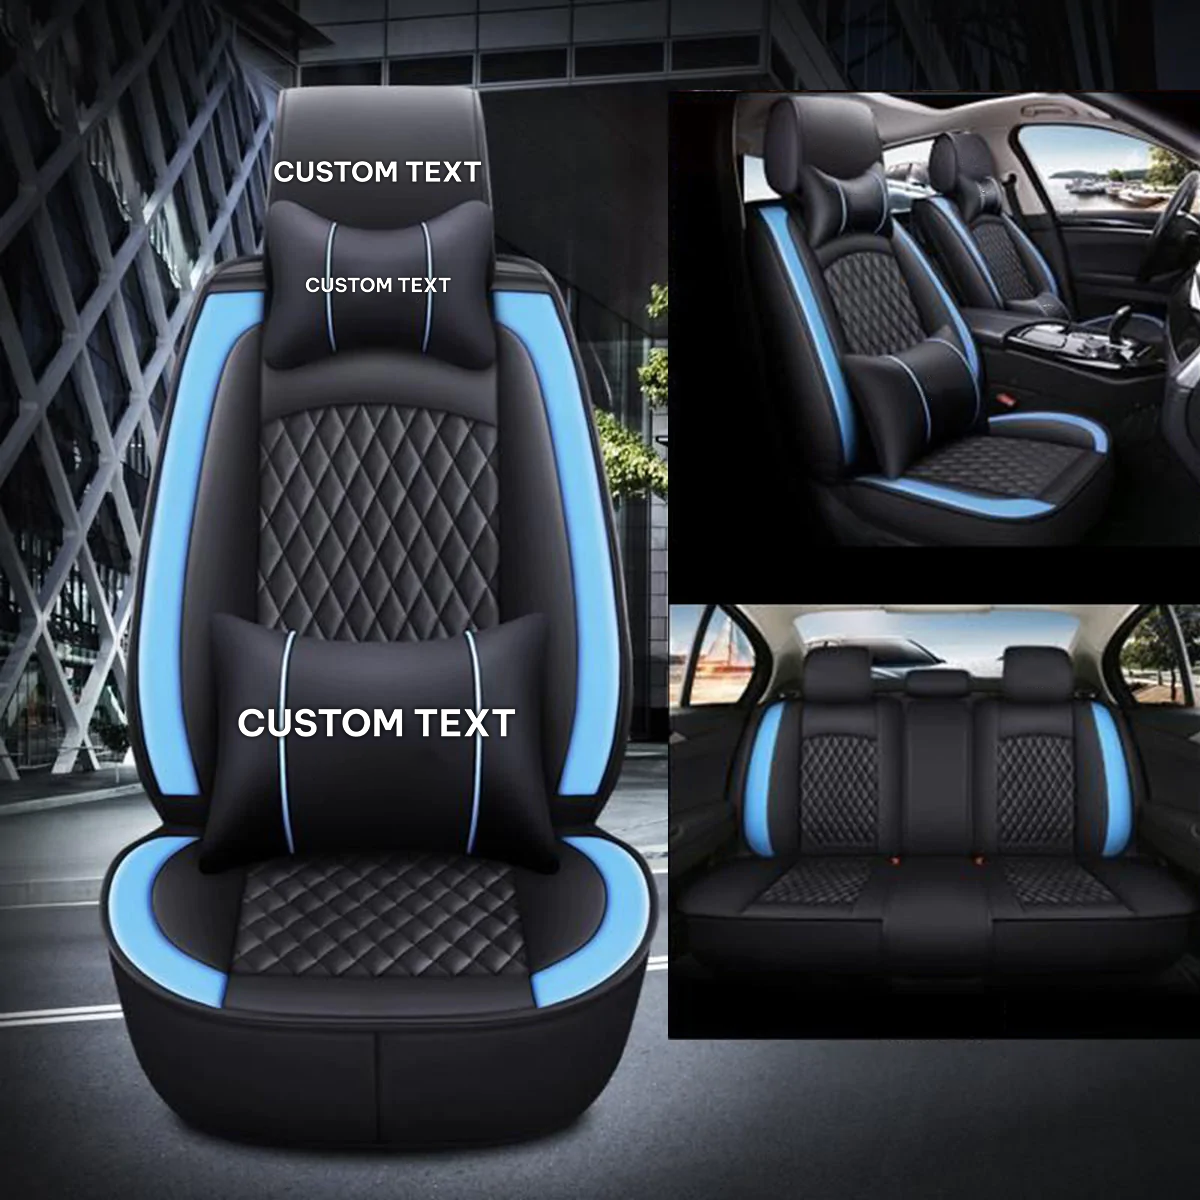 Custom Text For Seat Covers 5 Seats Full Set, Custom Fit For Your Cars, Leatherette Automotive Seat Cushion Protector Universal Fit, Vehicle Auto Interior Decor JG13988